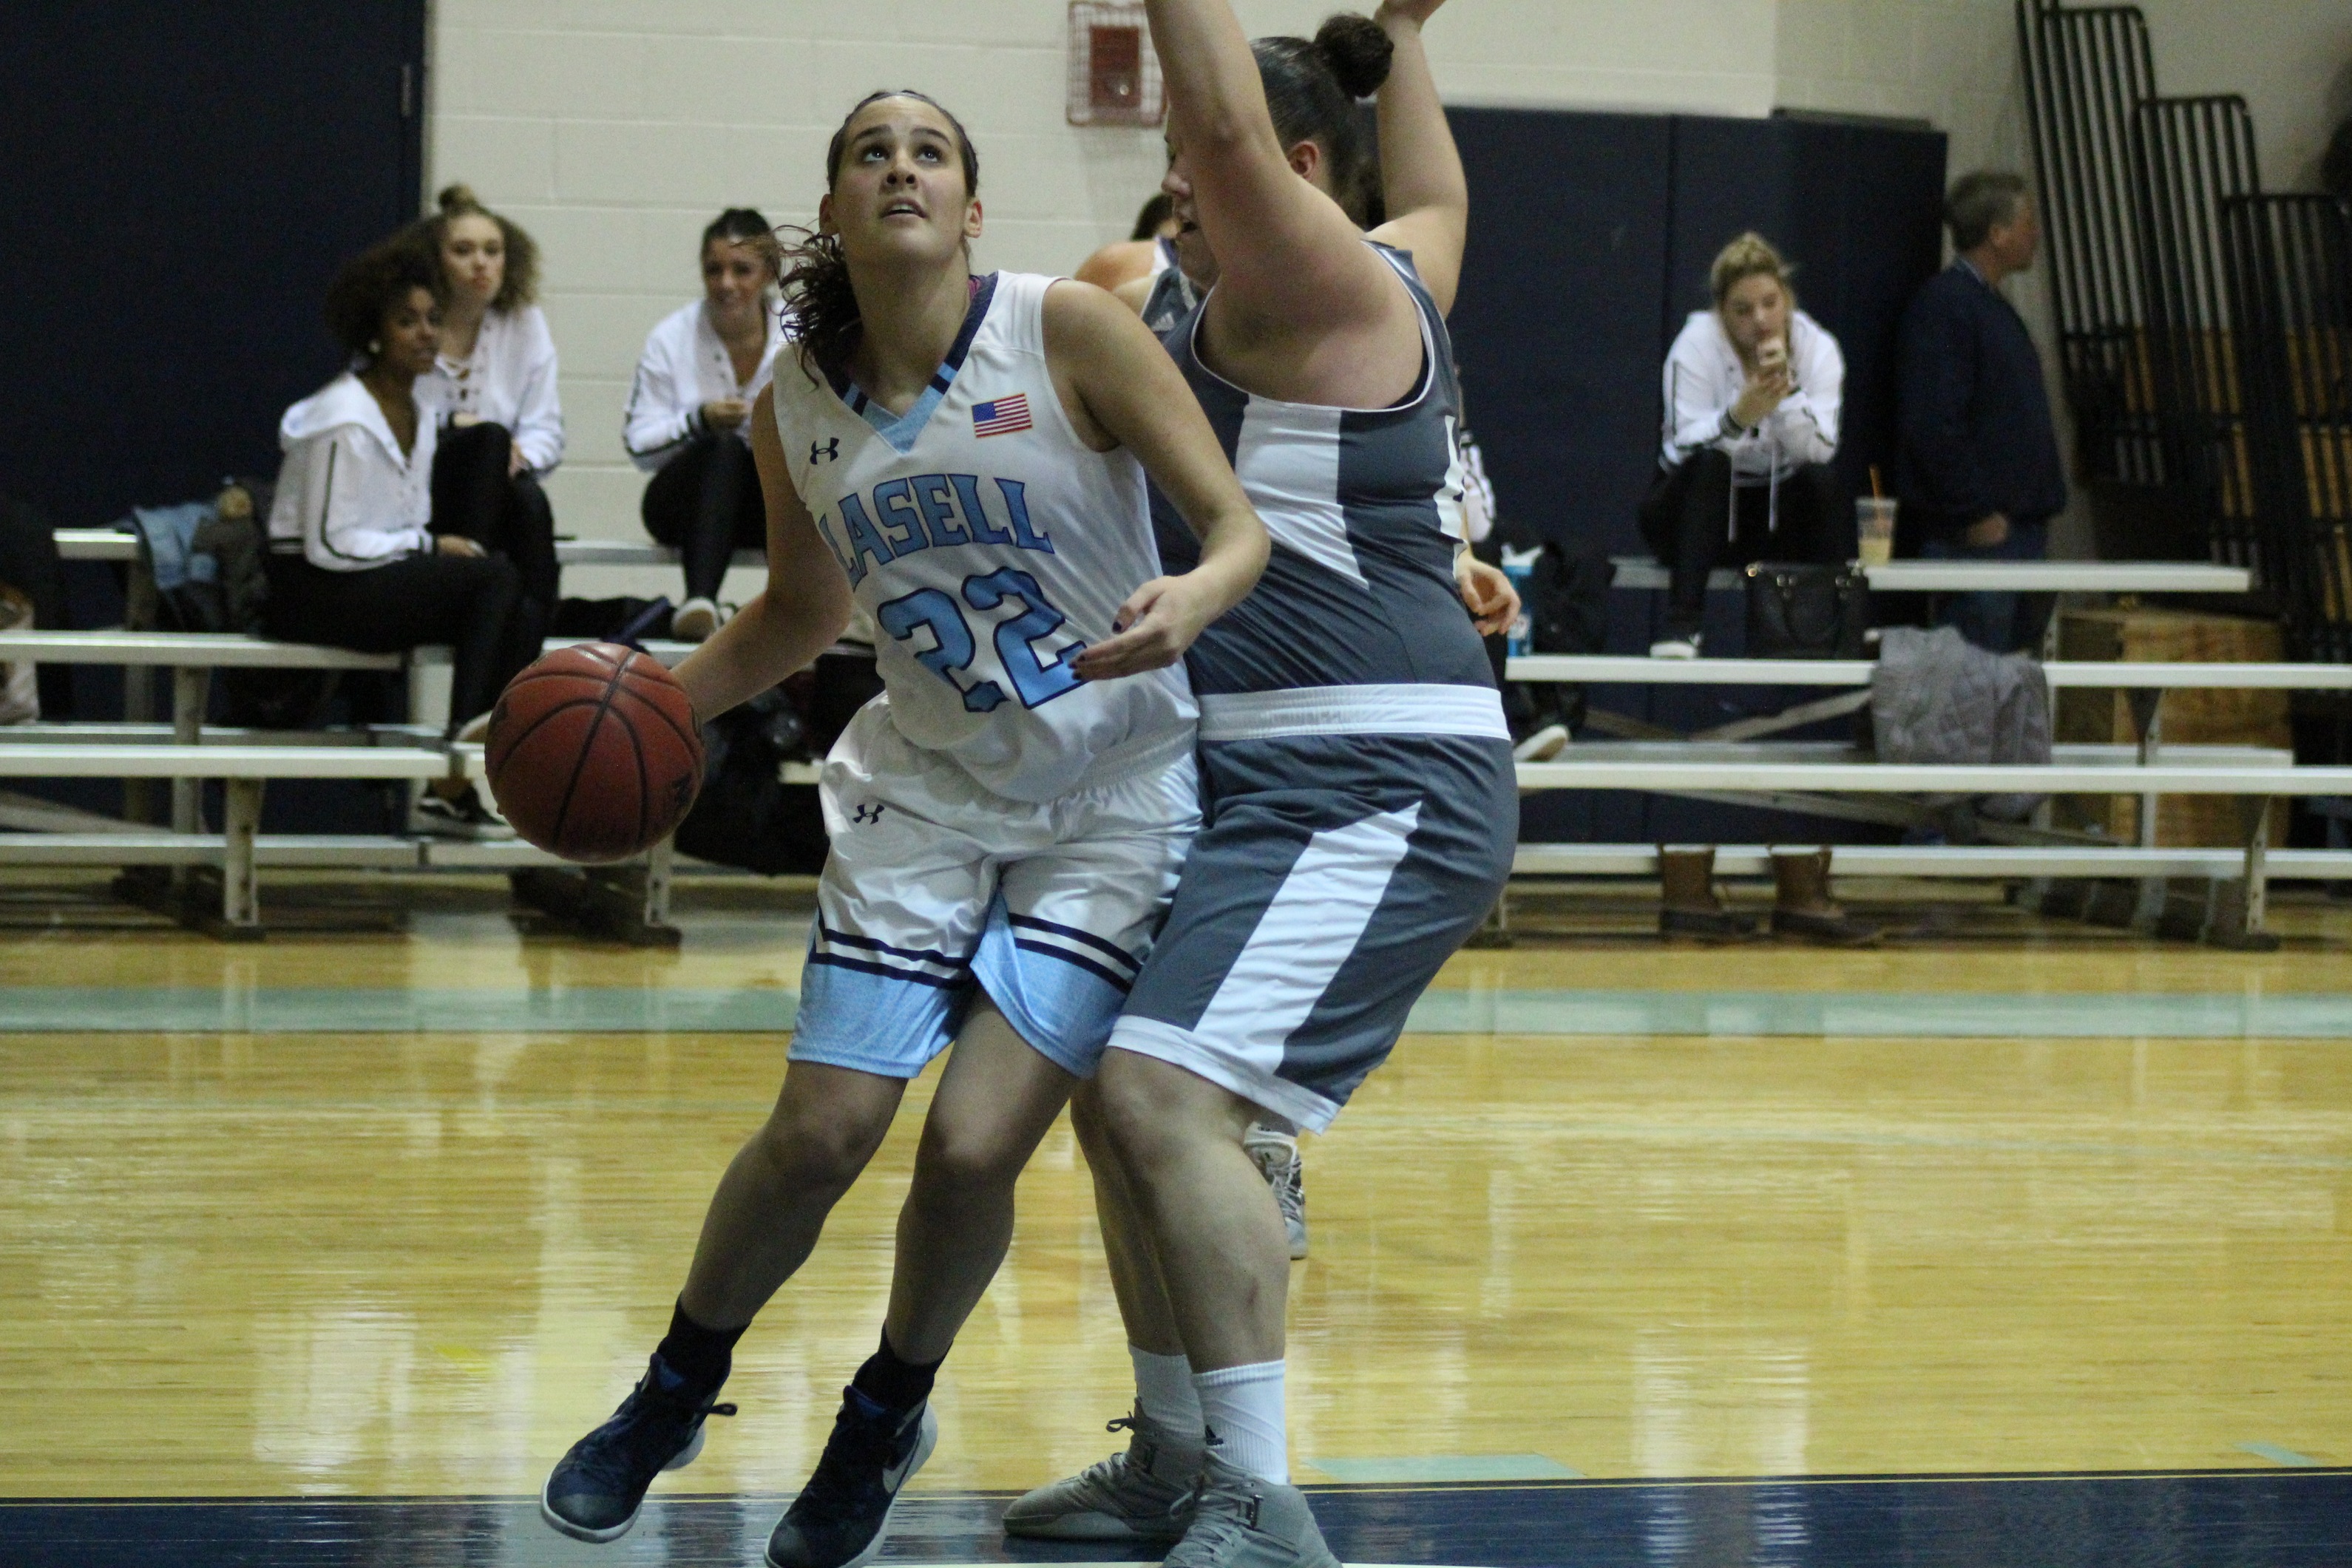 Lasers Fall to USJ 57-52 in GNAC Contest